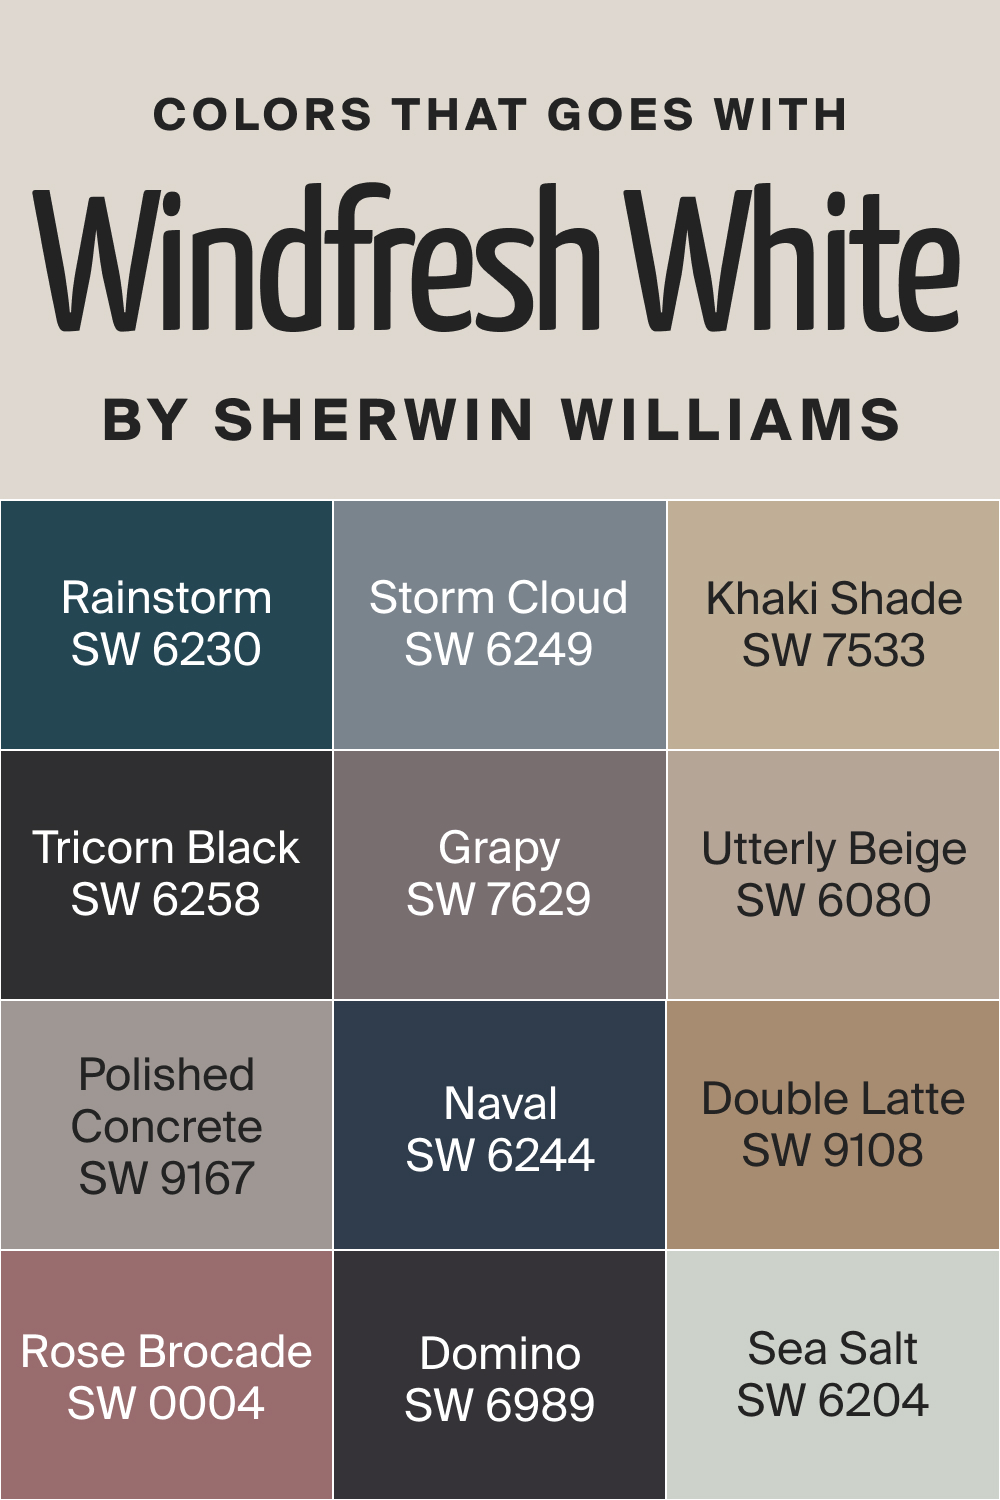 Colors that goes with SW Pacer White by Sherwin Williams